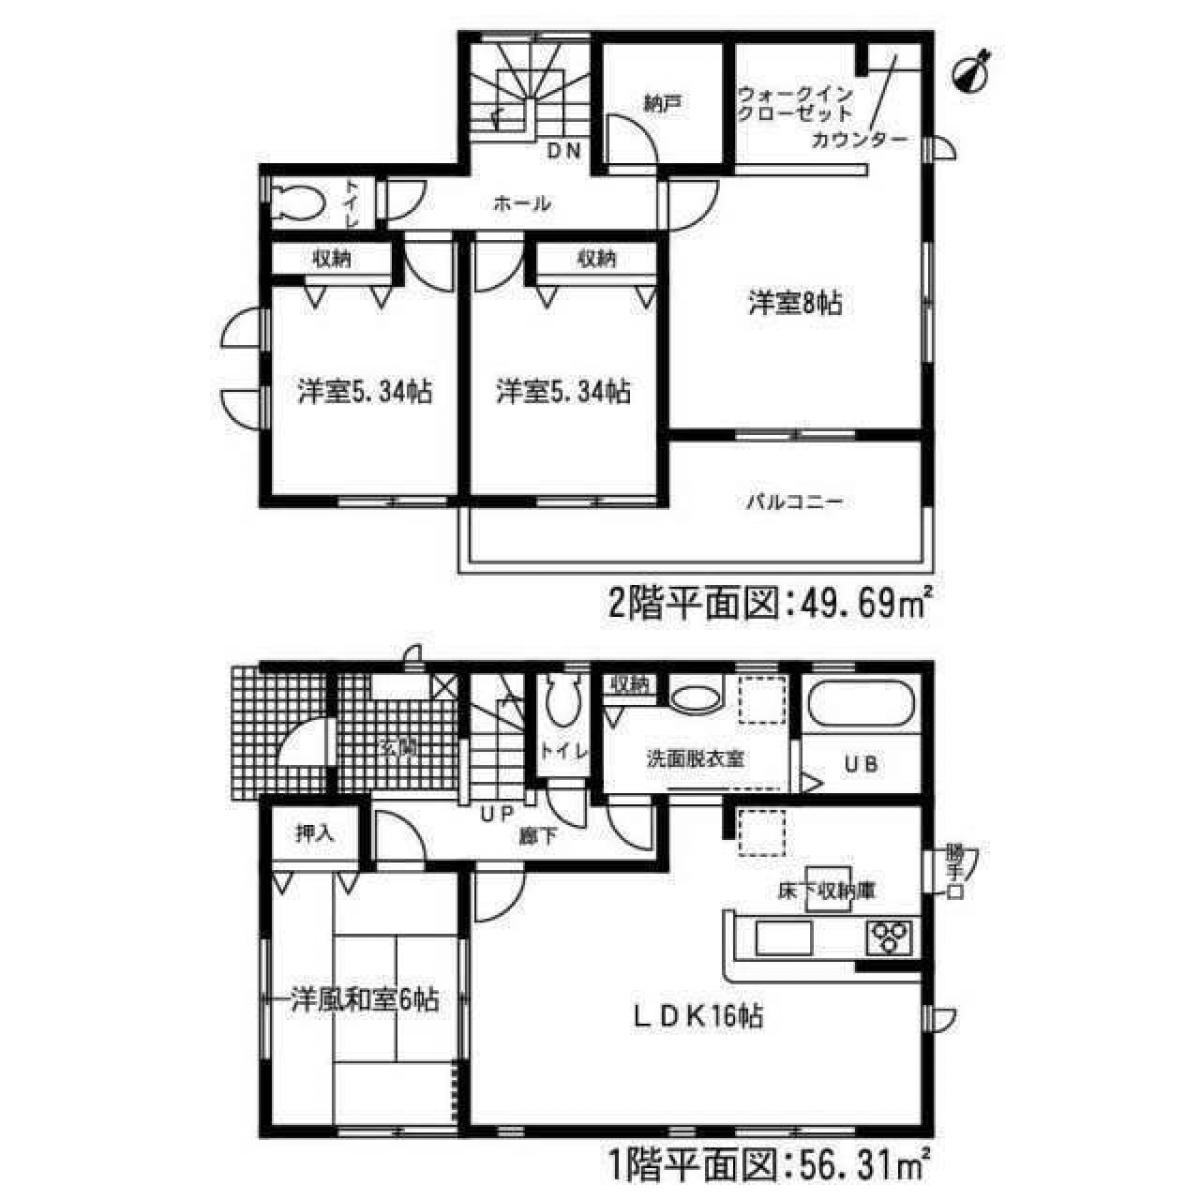 Picture of Home For Sale in Ena Shi, Gifu, Japan